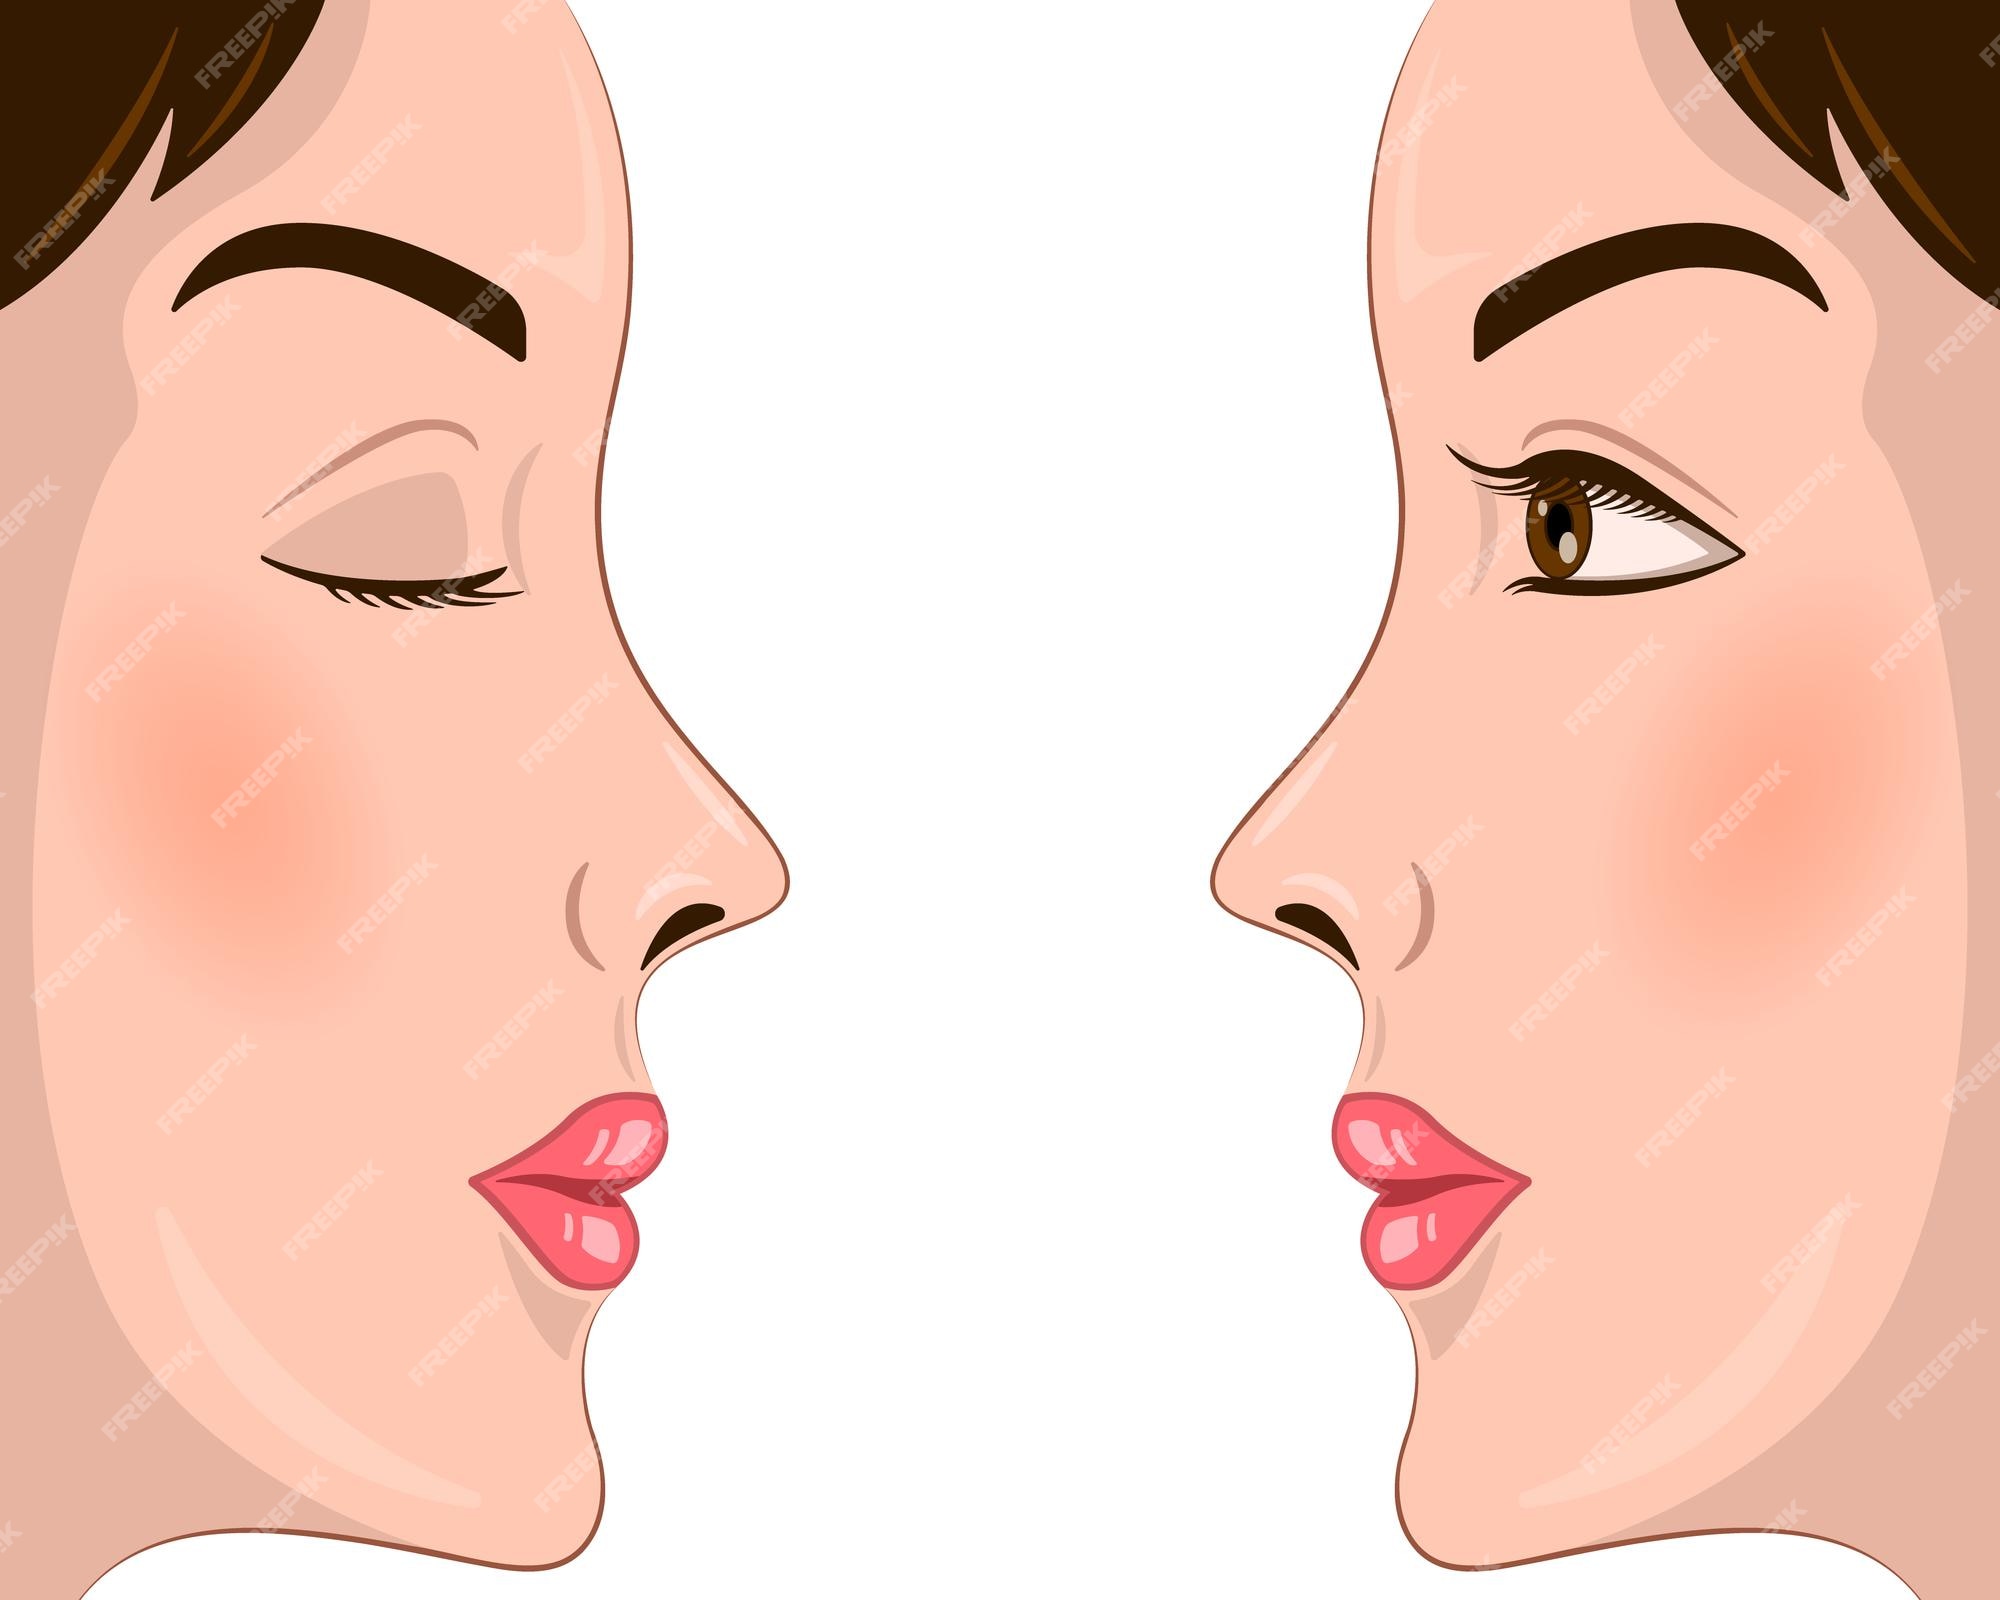 Premium Vector | Woman face side view with open and closed eyes cartoon  style